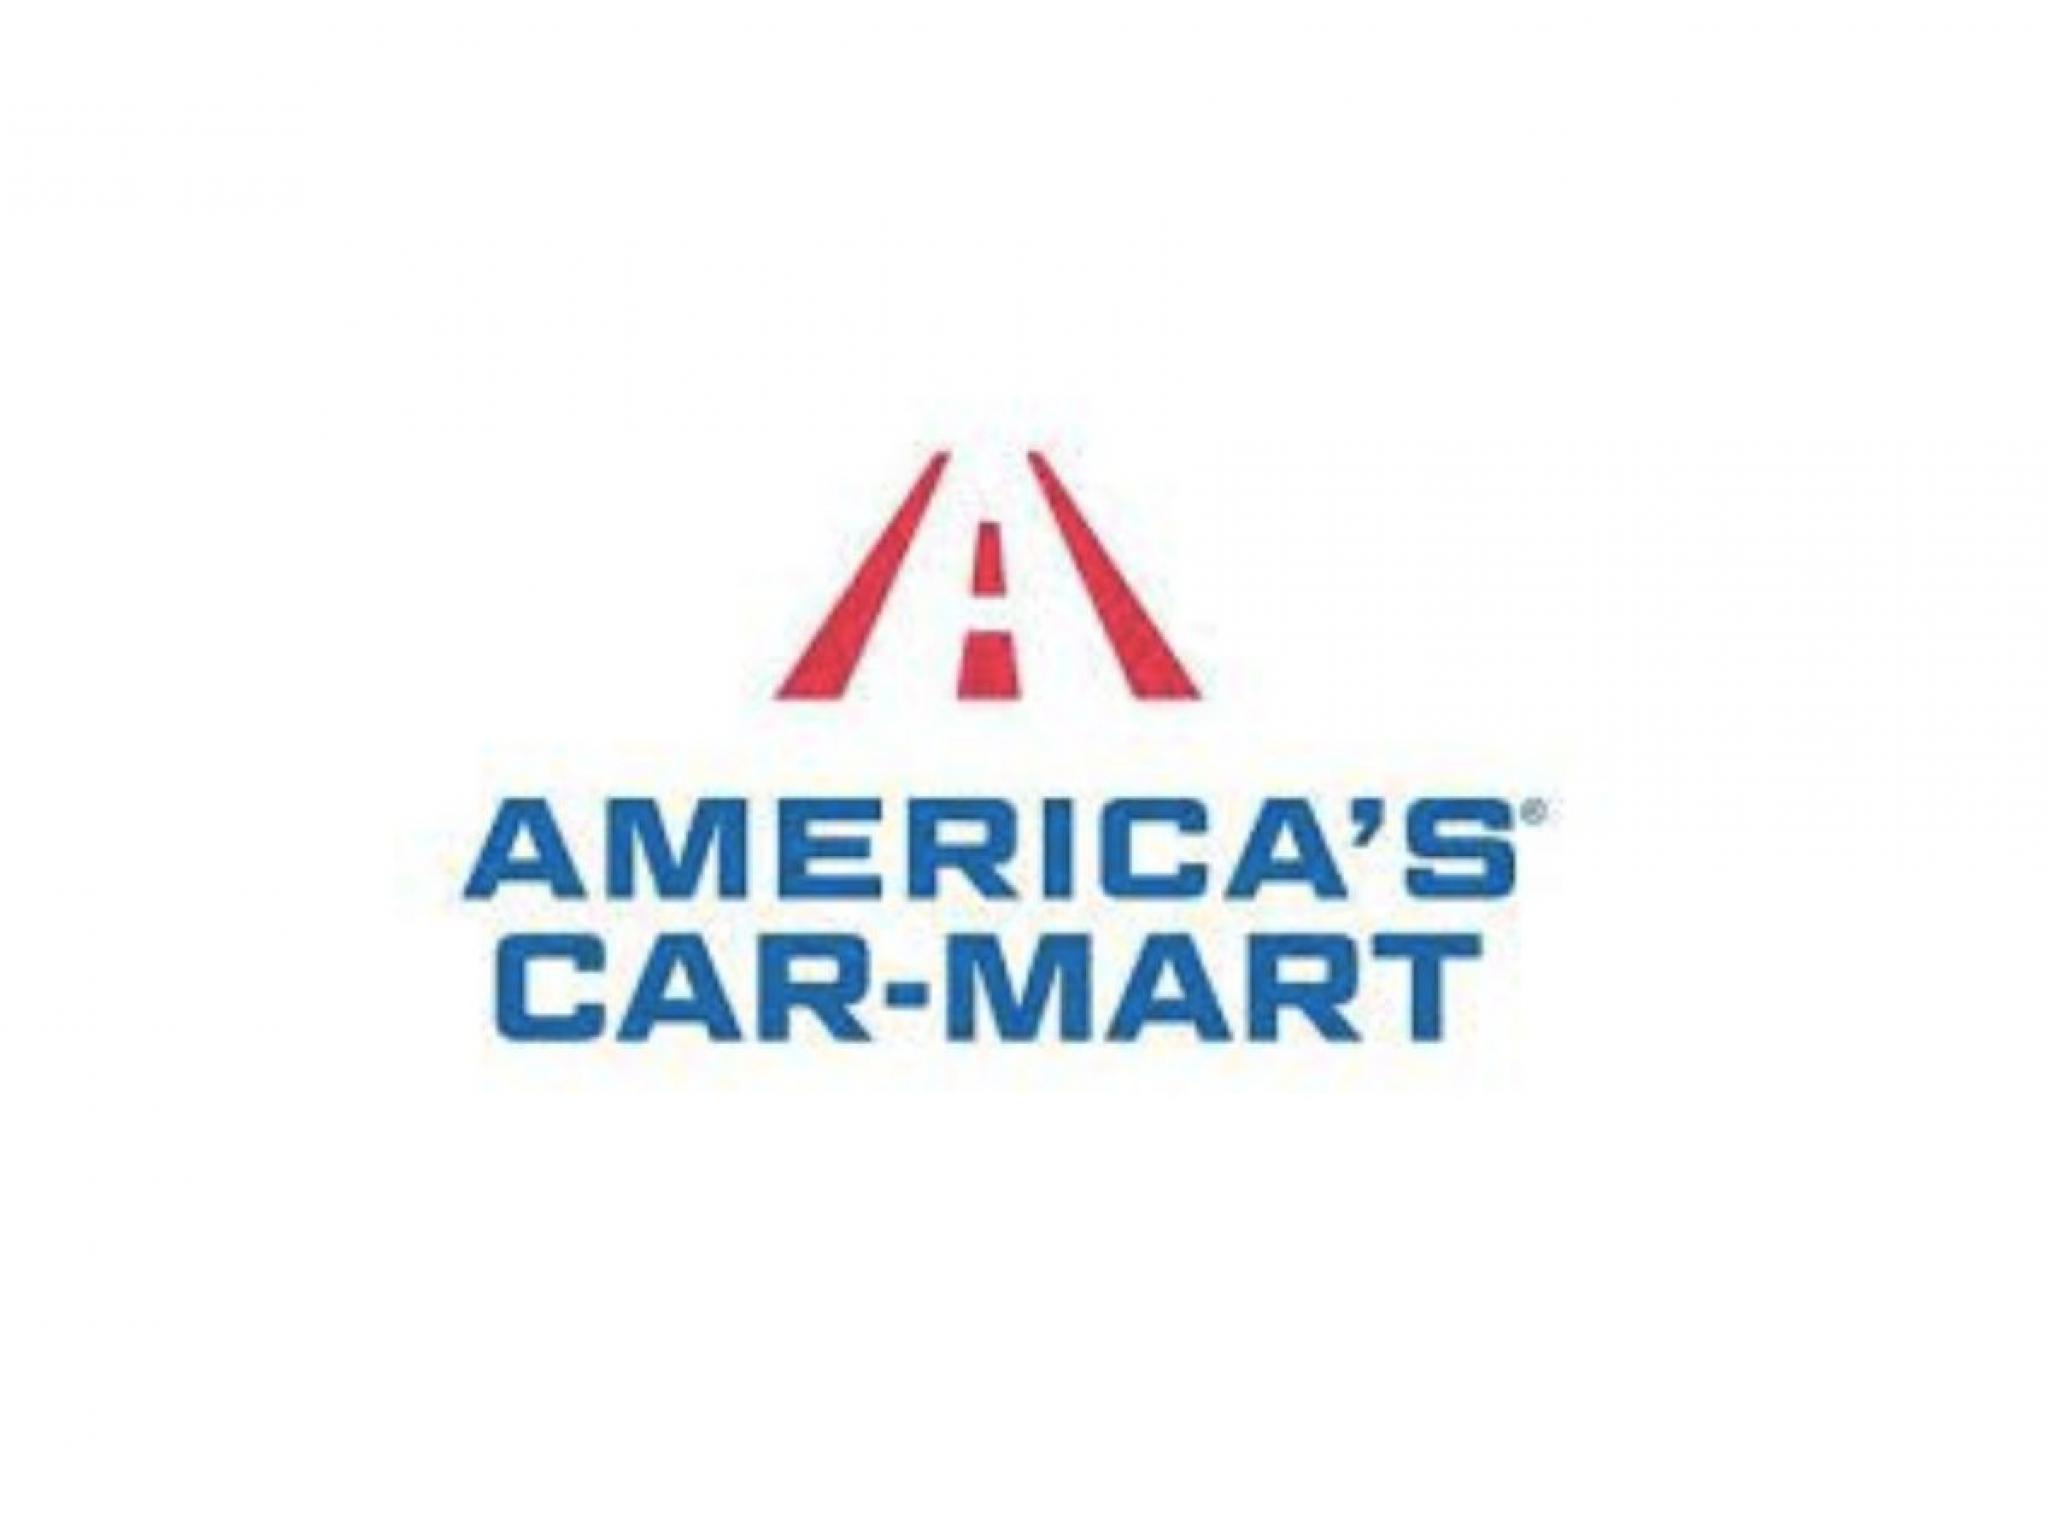  insiders-buying-americas-car-mart-and-2-other-stocks 